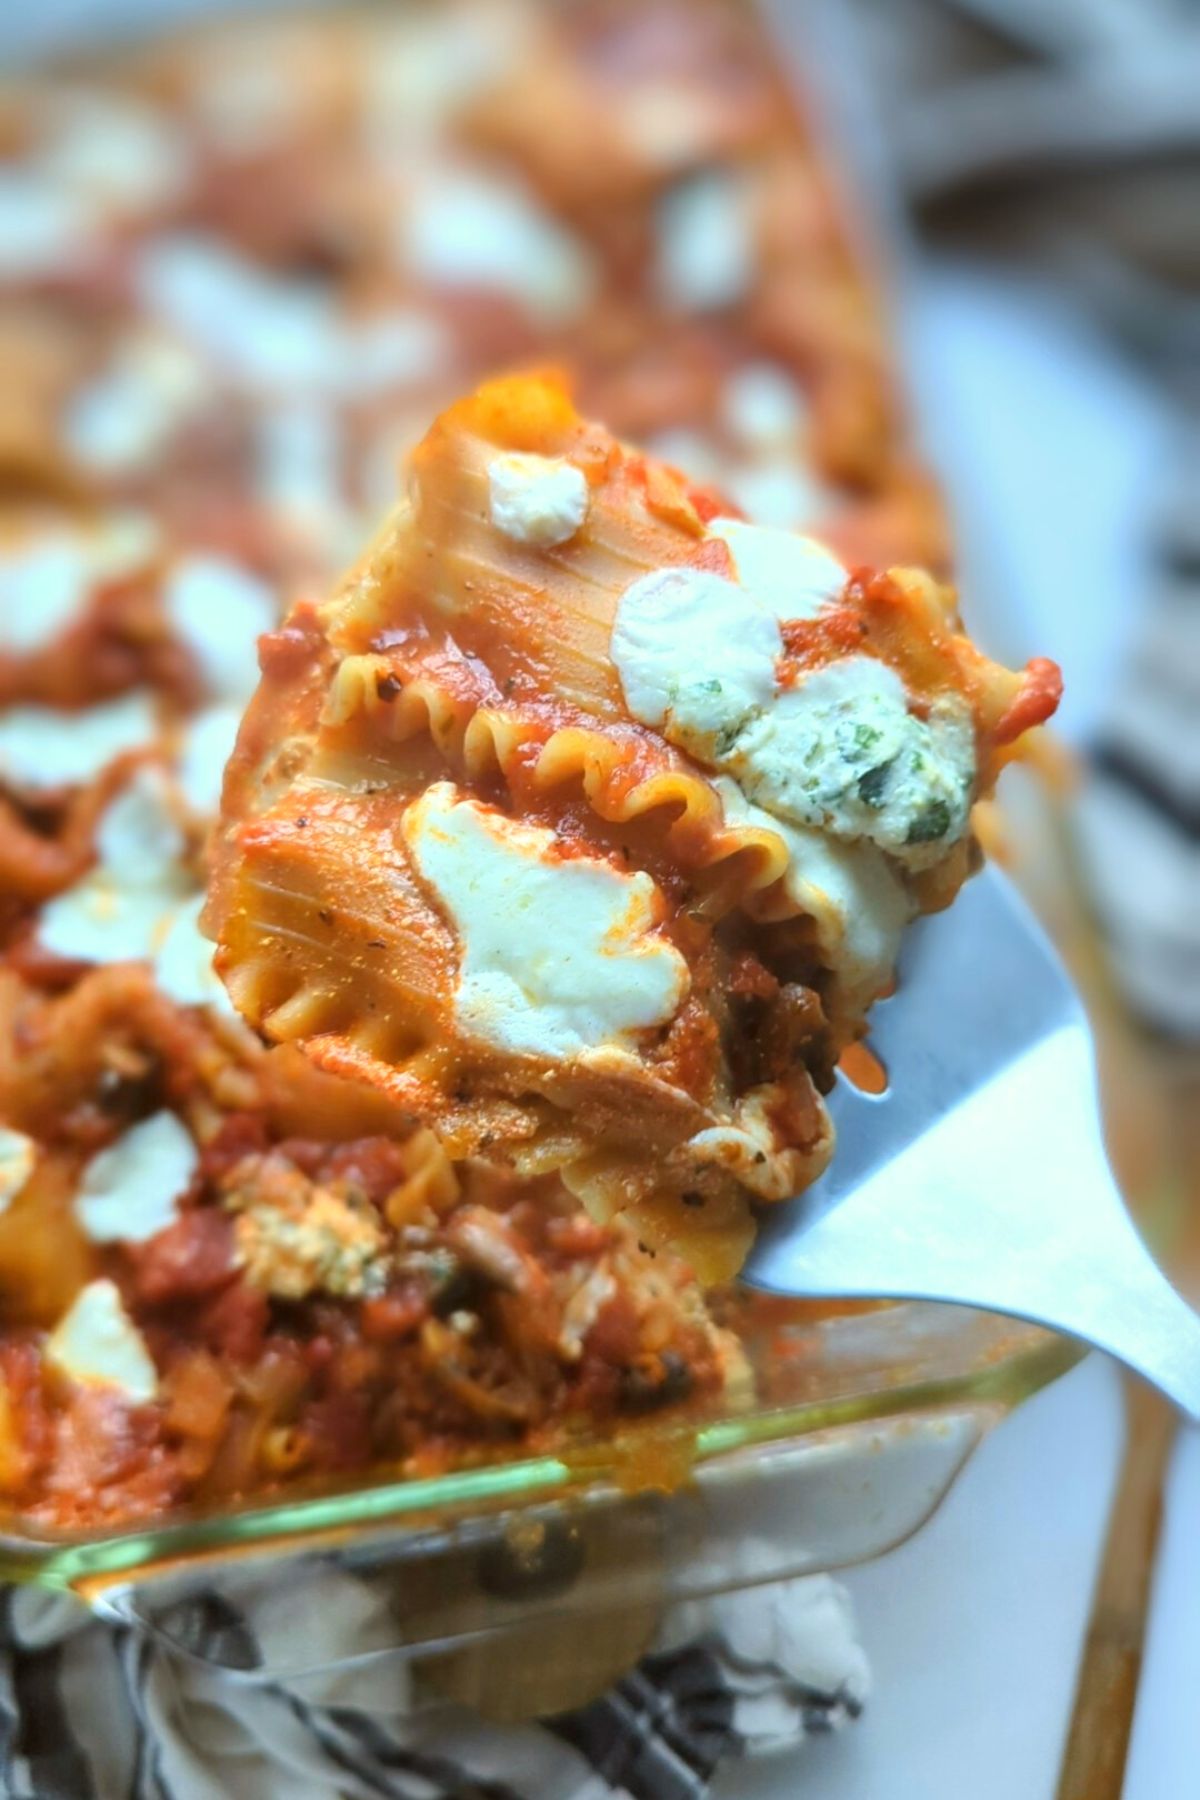 low salt lasagne recipe with low sodium cheese pasta filling and vegetables, a heaty healthy lasagna with low cheese